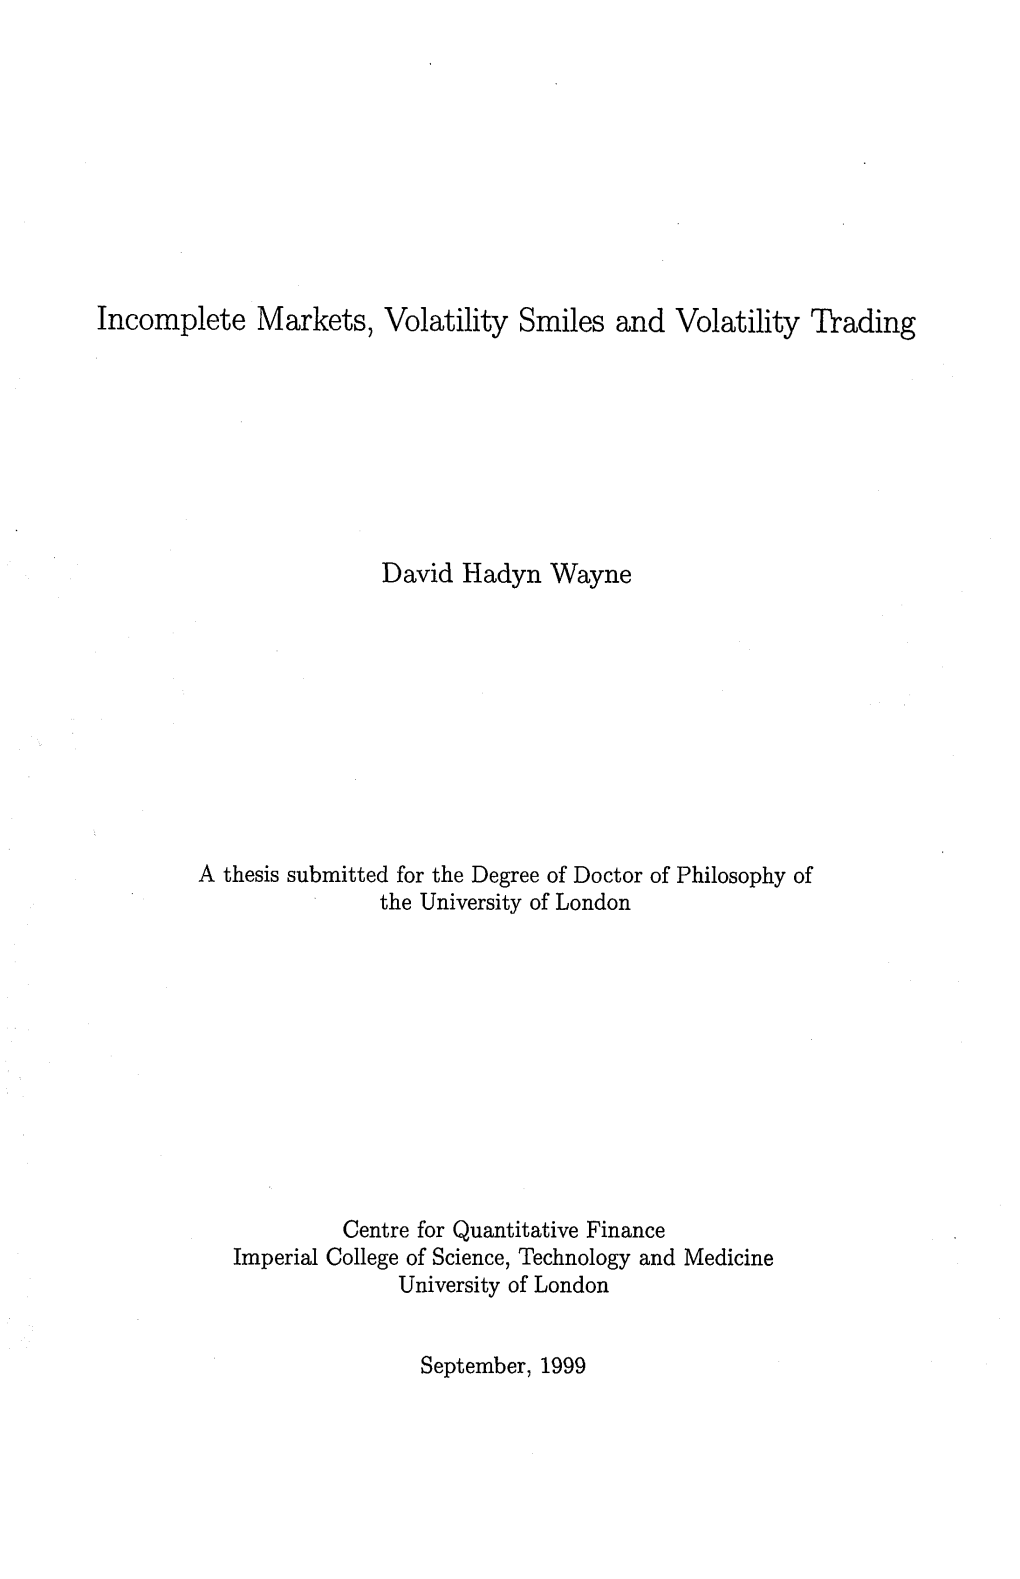 Incomplete Markets, Volatility Smiles and Volatility Trading